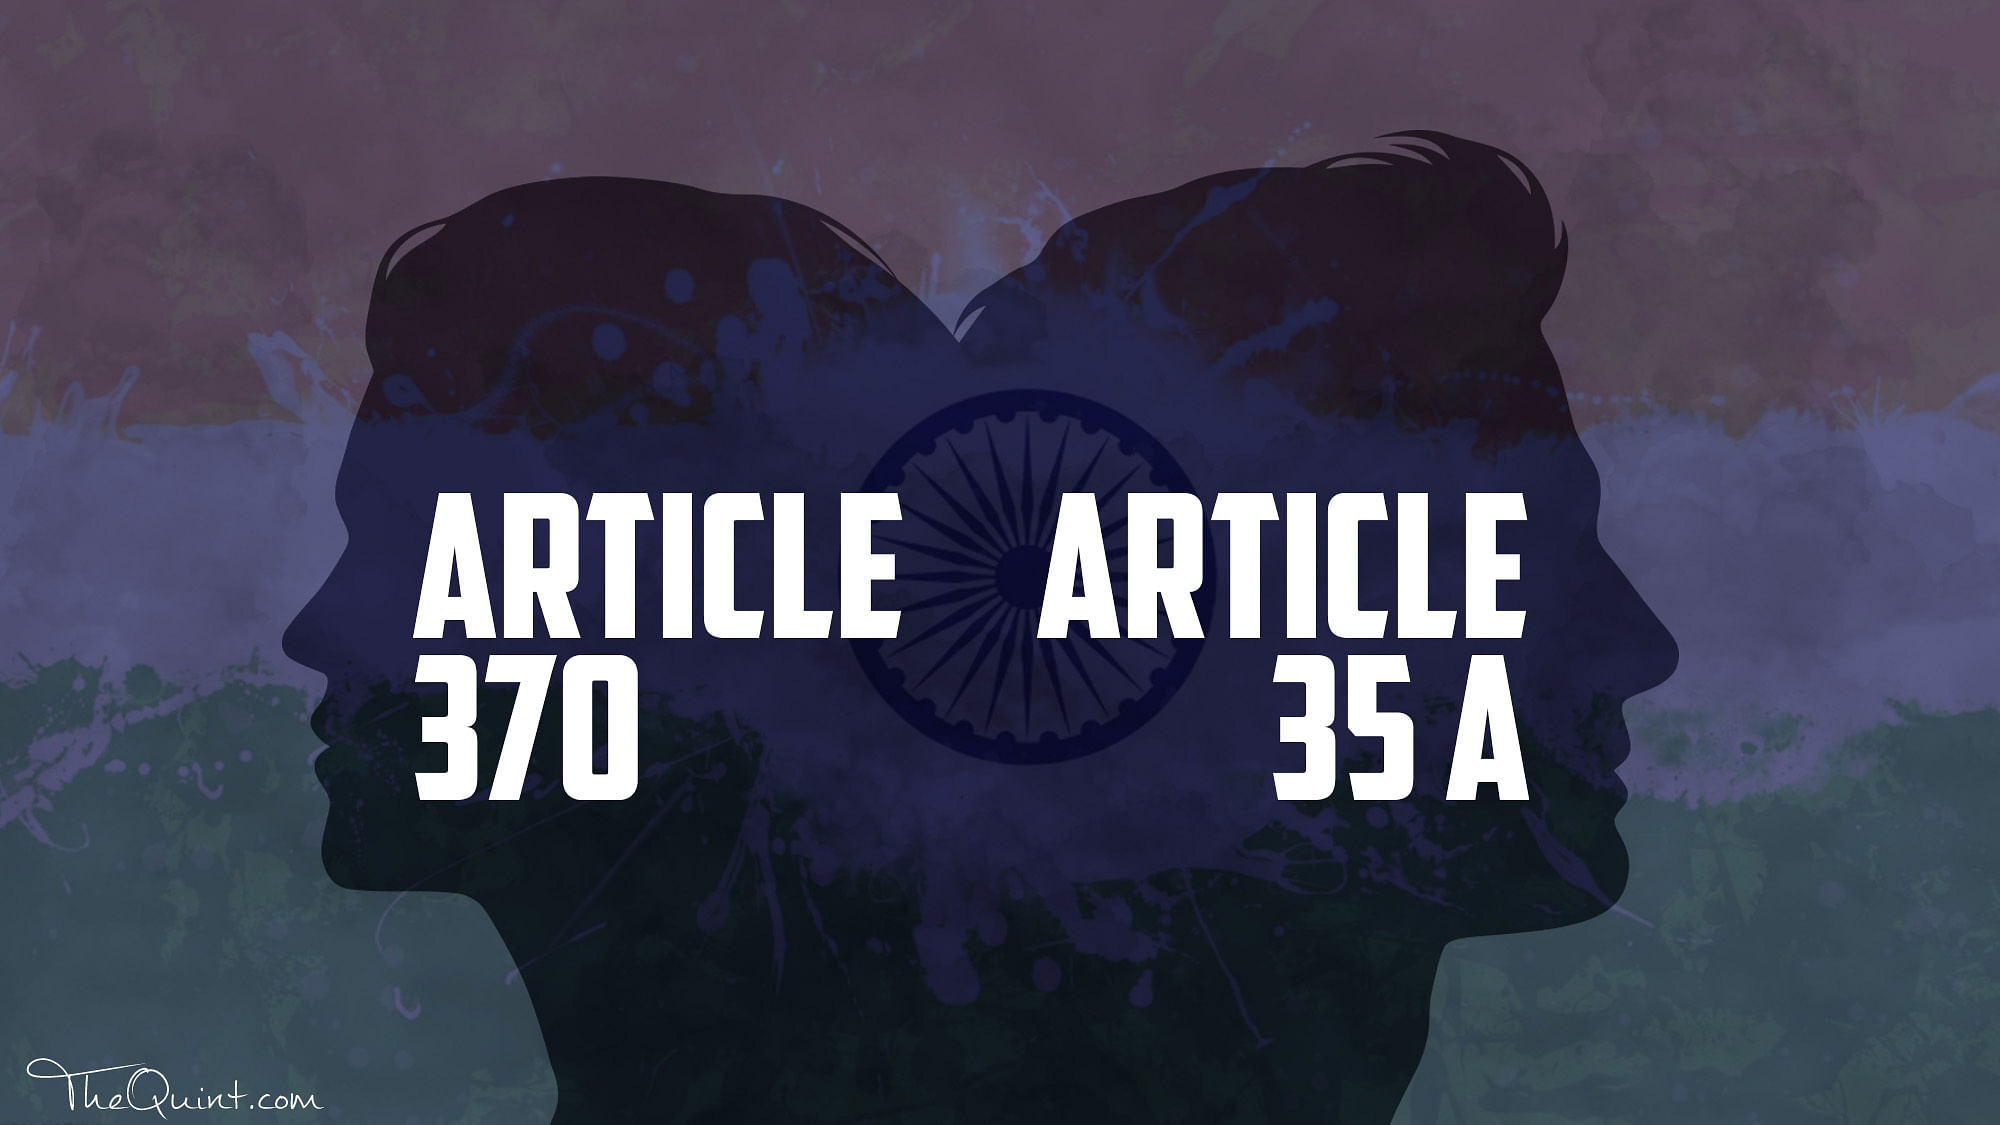 The Quint curates insights by legal experts on questions surrounding the revocation of Article 370 an Article 35A.